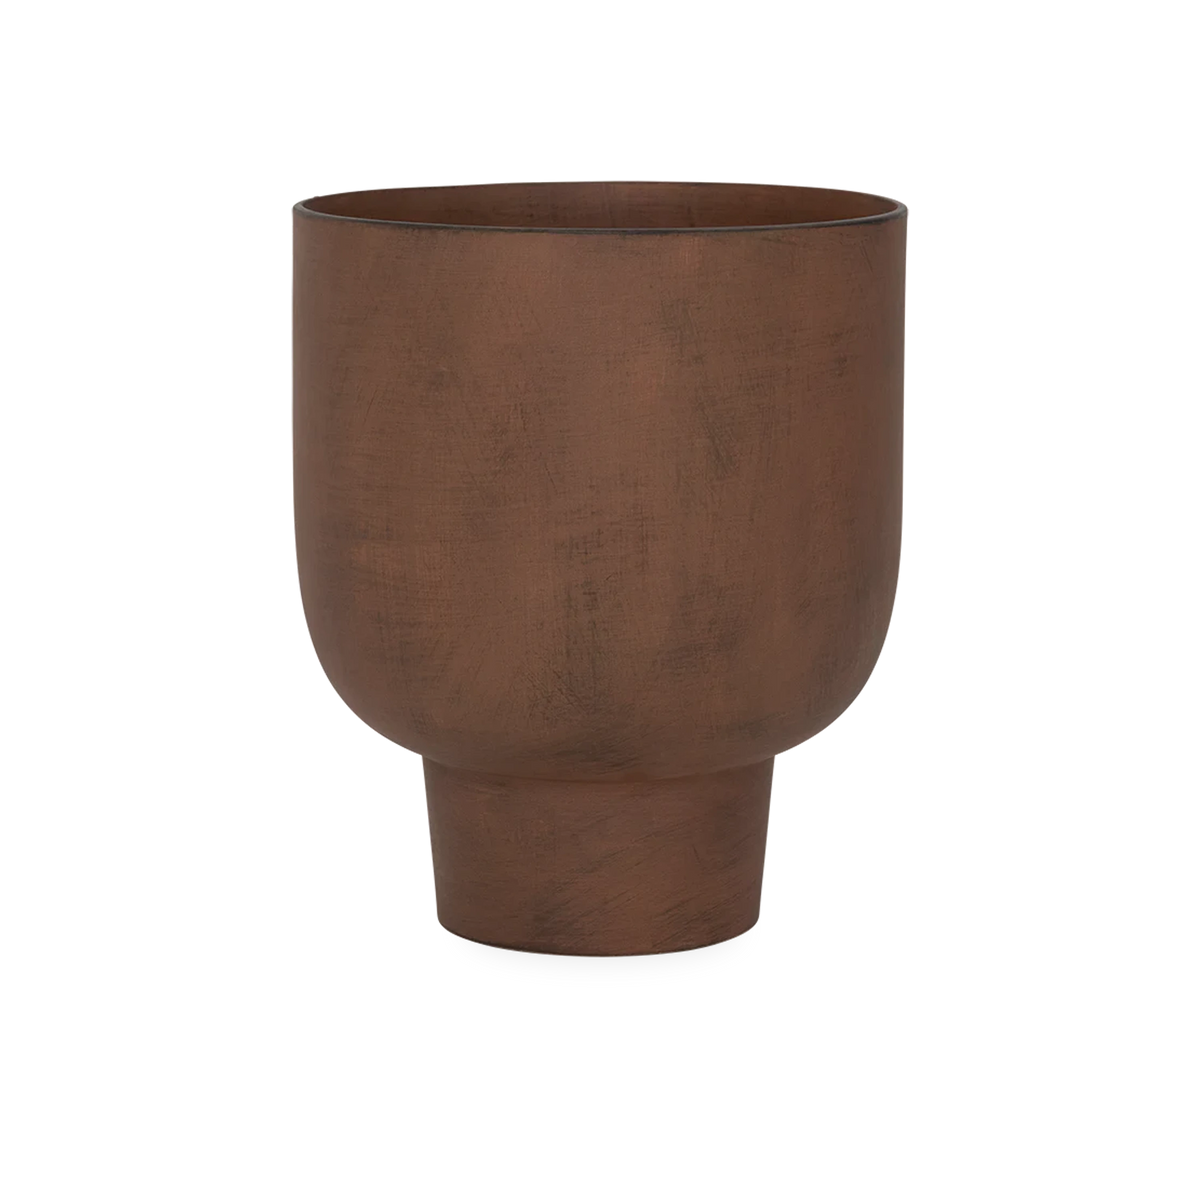 Carrying a light organic, imperfect shape, the Tapered Pot provides a timeless corten steel finish that perfectly complements its handmade, pedestalled body.